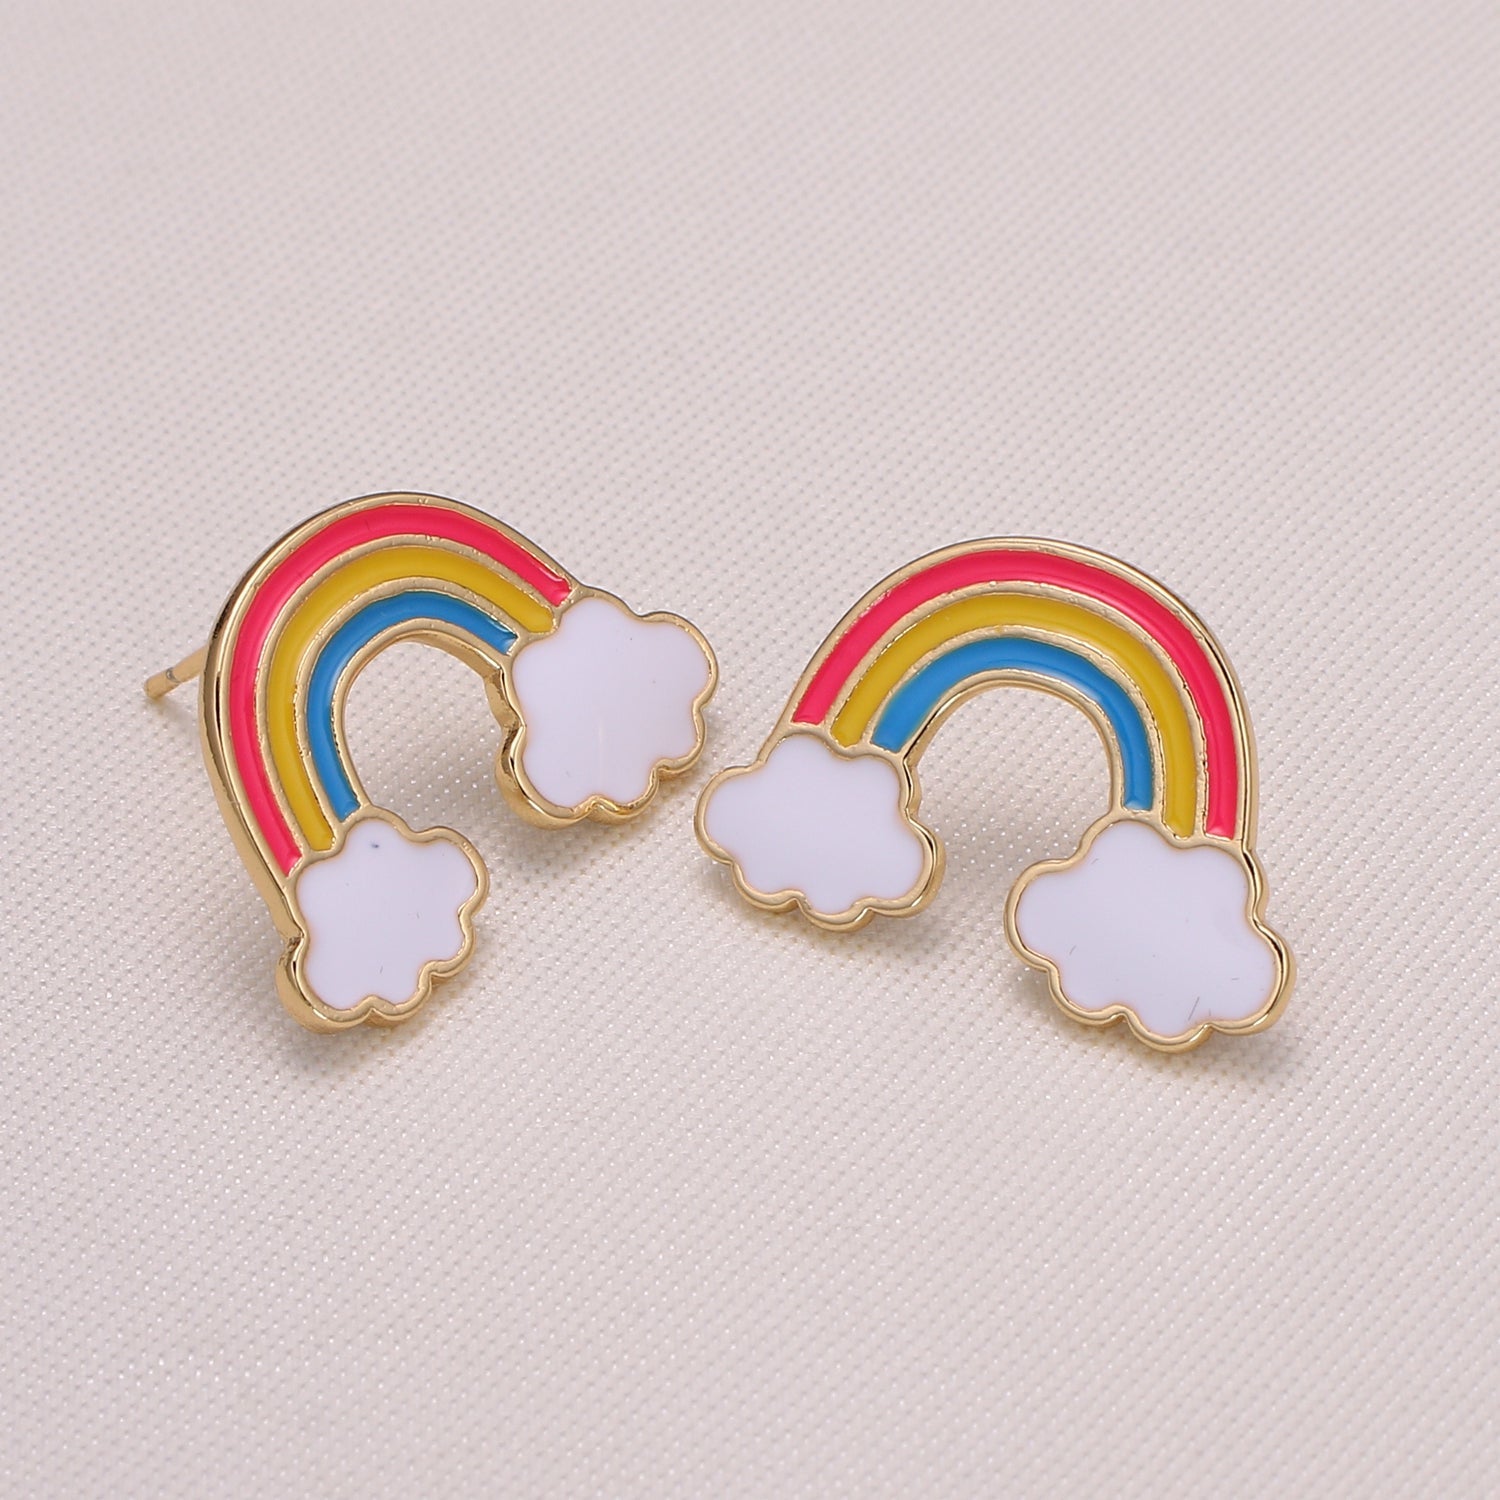 Dainty Gold Plated Colorful Rainbow & Cloud Studs Earrings GP-1028 - DLUXCA